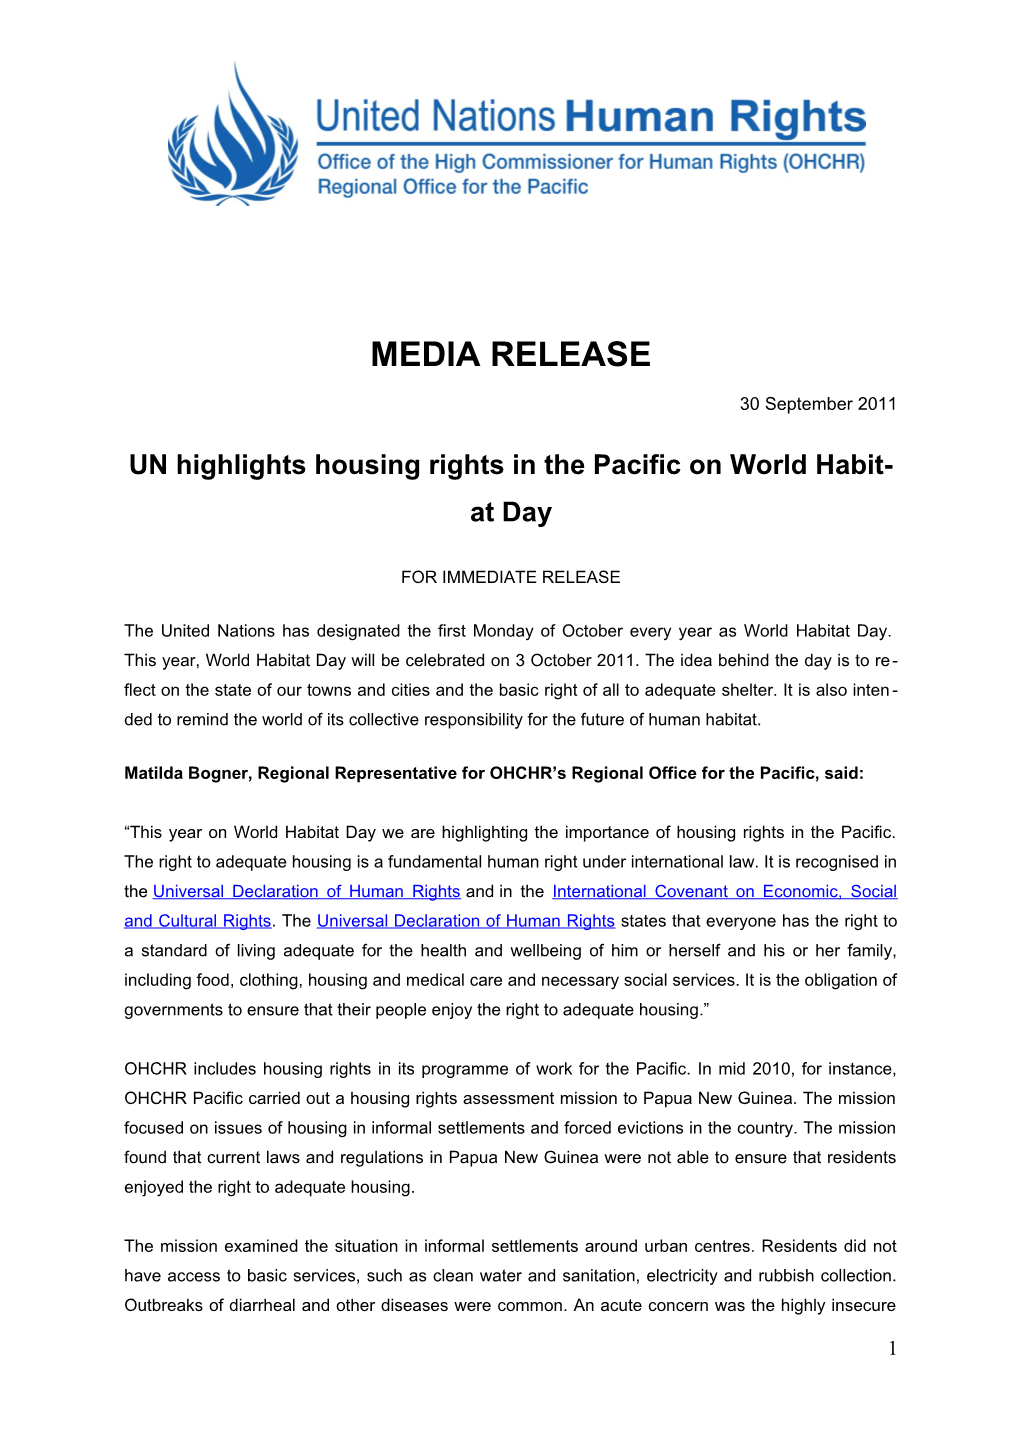 UN Highlights Housing Rights in the Pacific on World Habitat Day